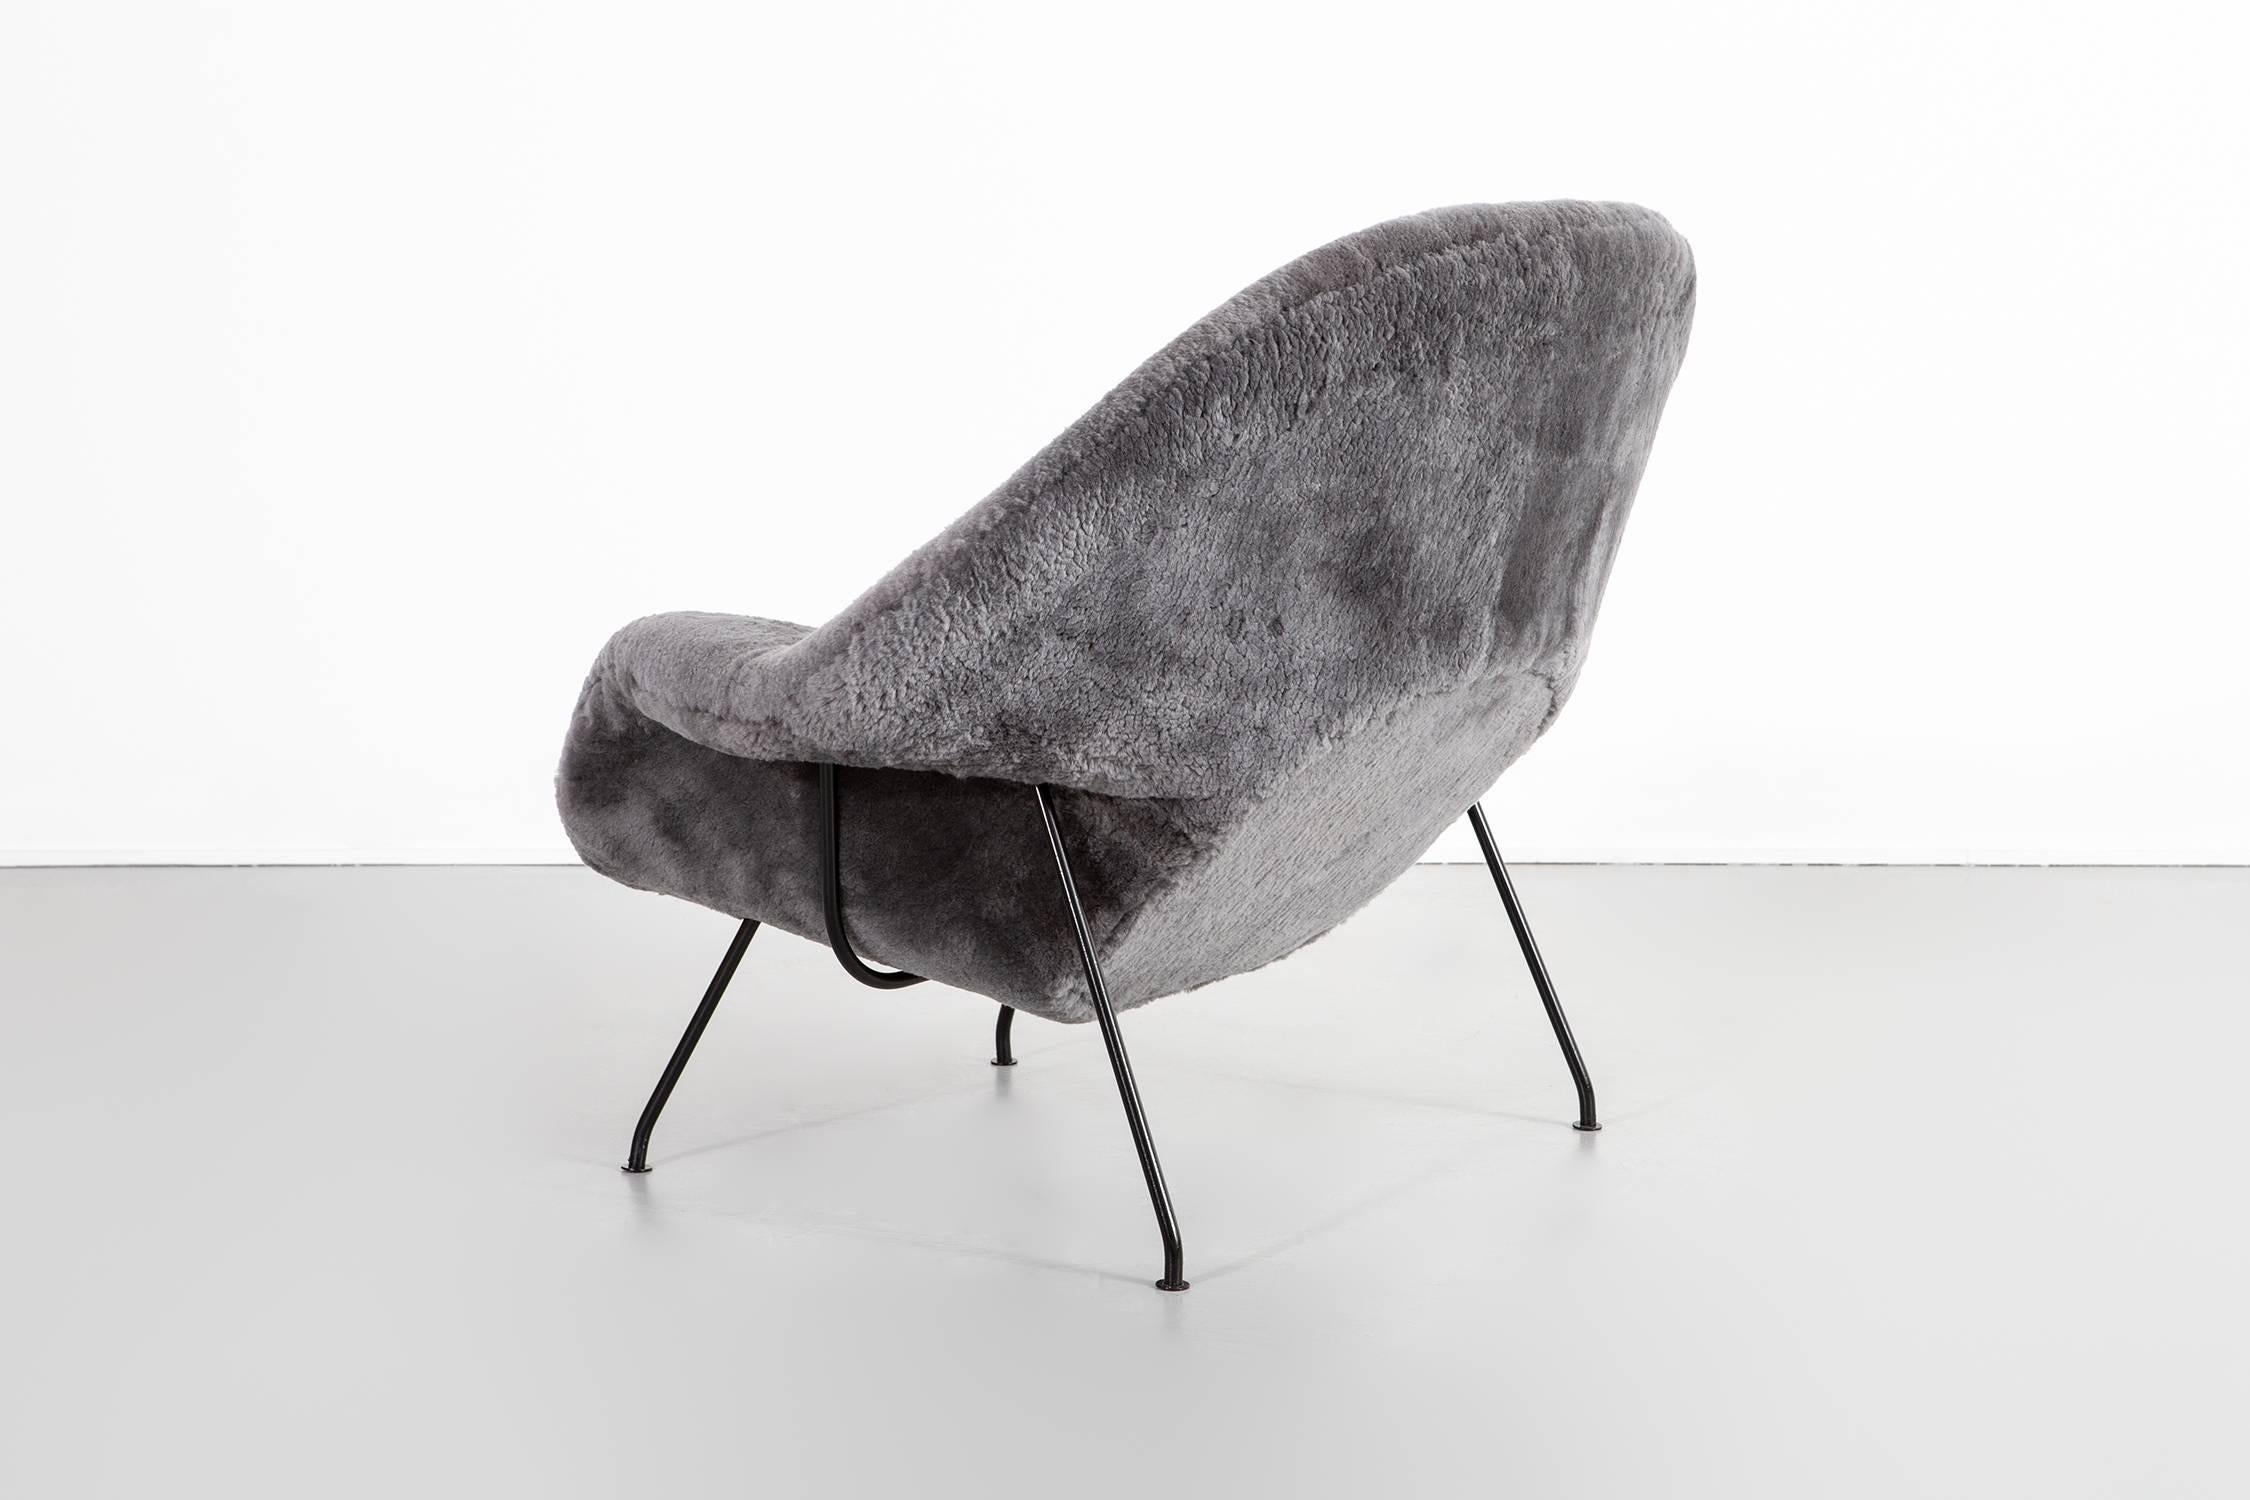 American Set of Saarinen Womb Chairs Reupholstered in Shearling